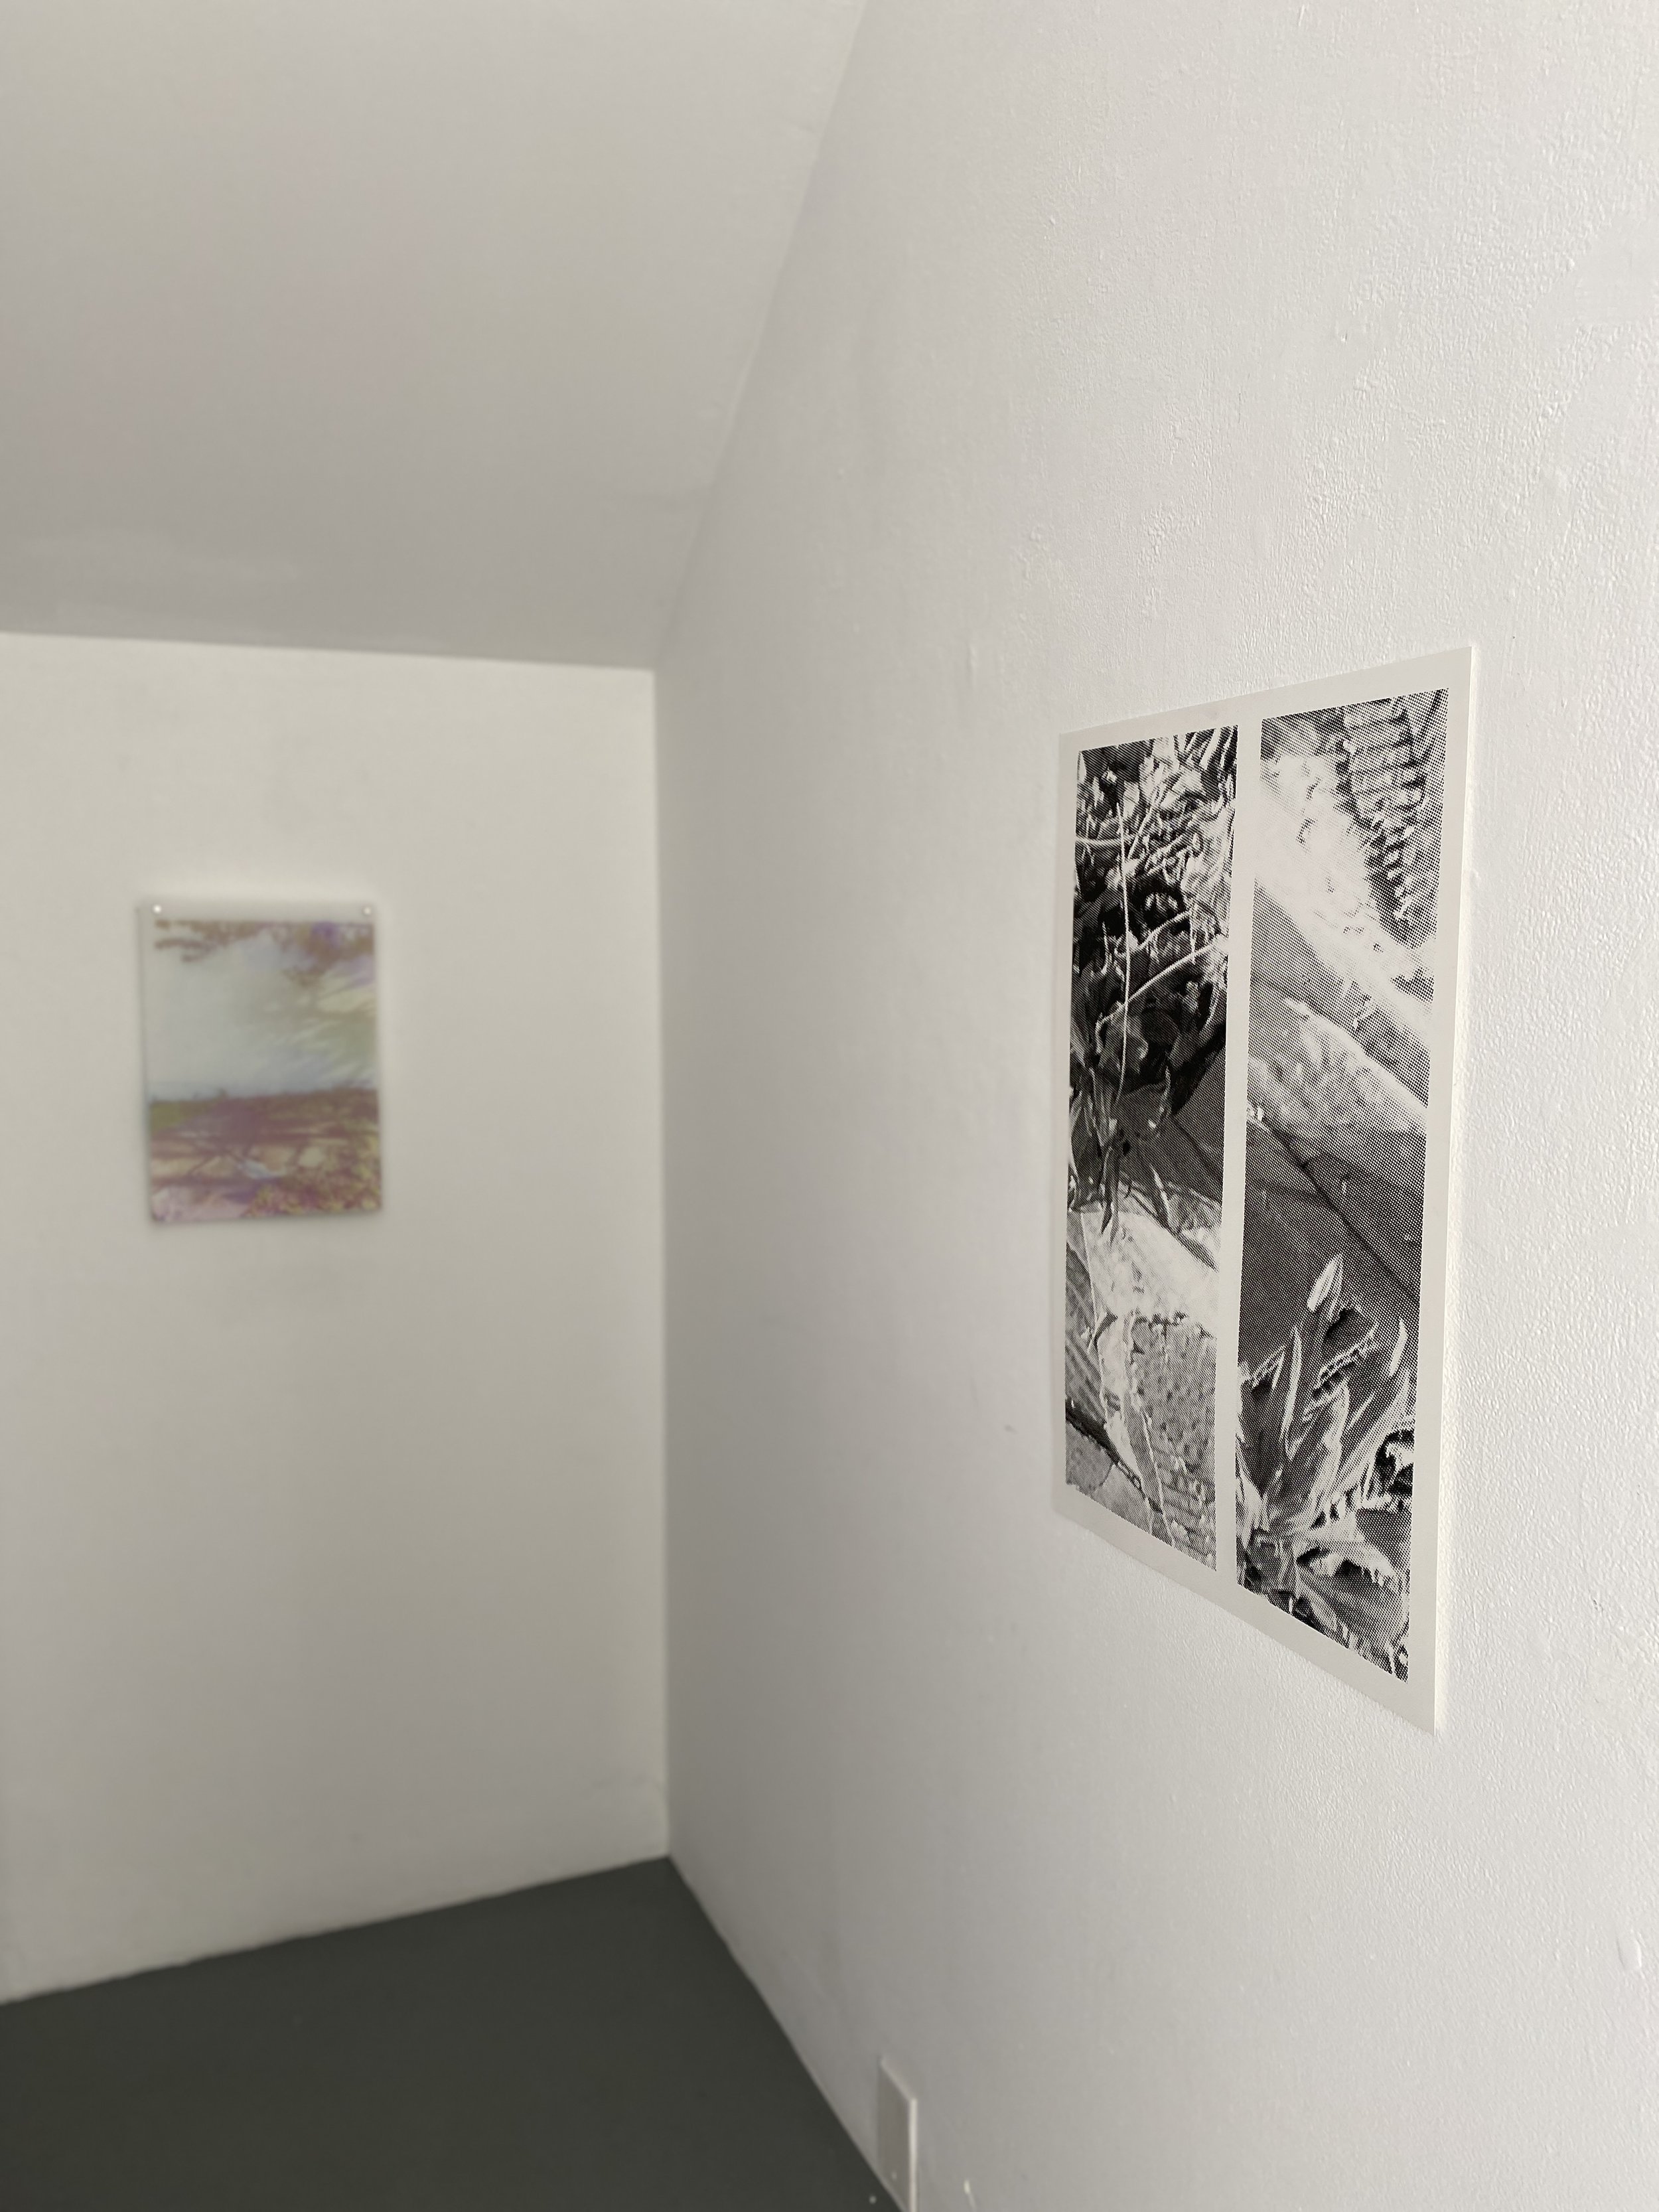  install of (re)patterning exhibition with Val Loewen at Malaspina Printmakers Project Space | 2023 